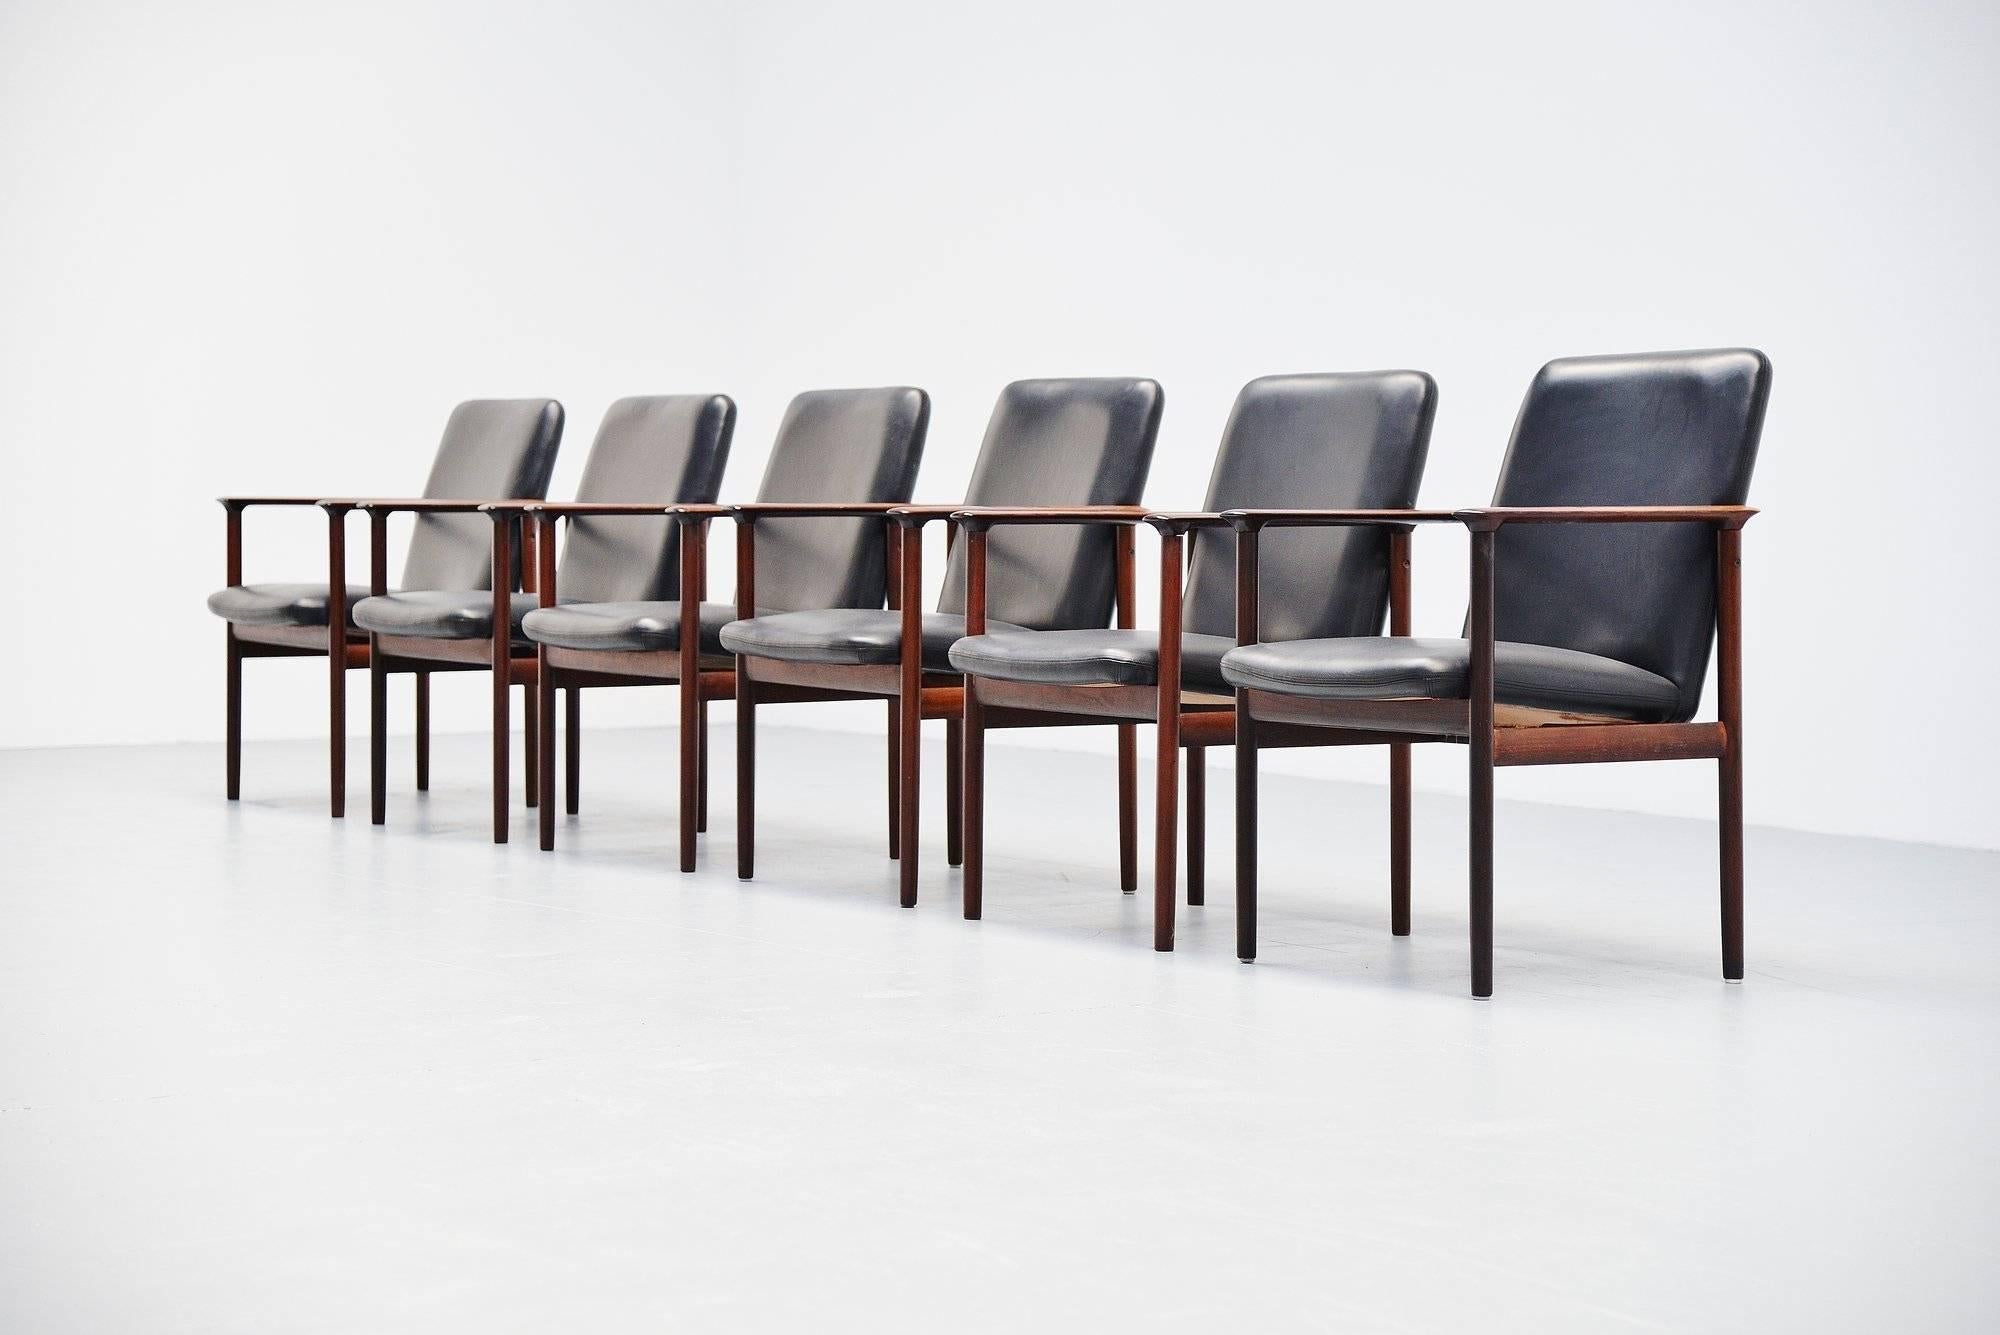 Nice set of 6 conference chairs designed by Cor Bontenbal for Fristho Franeker, Holland 1962. The chairs have rosewood frames and black leather upholstery. The chairs are still in good original condition with a nice patina to the arms, have a look